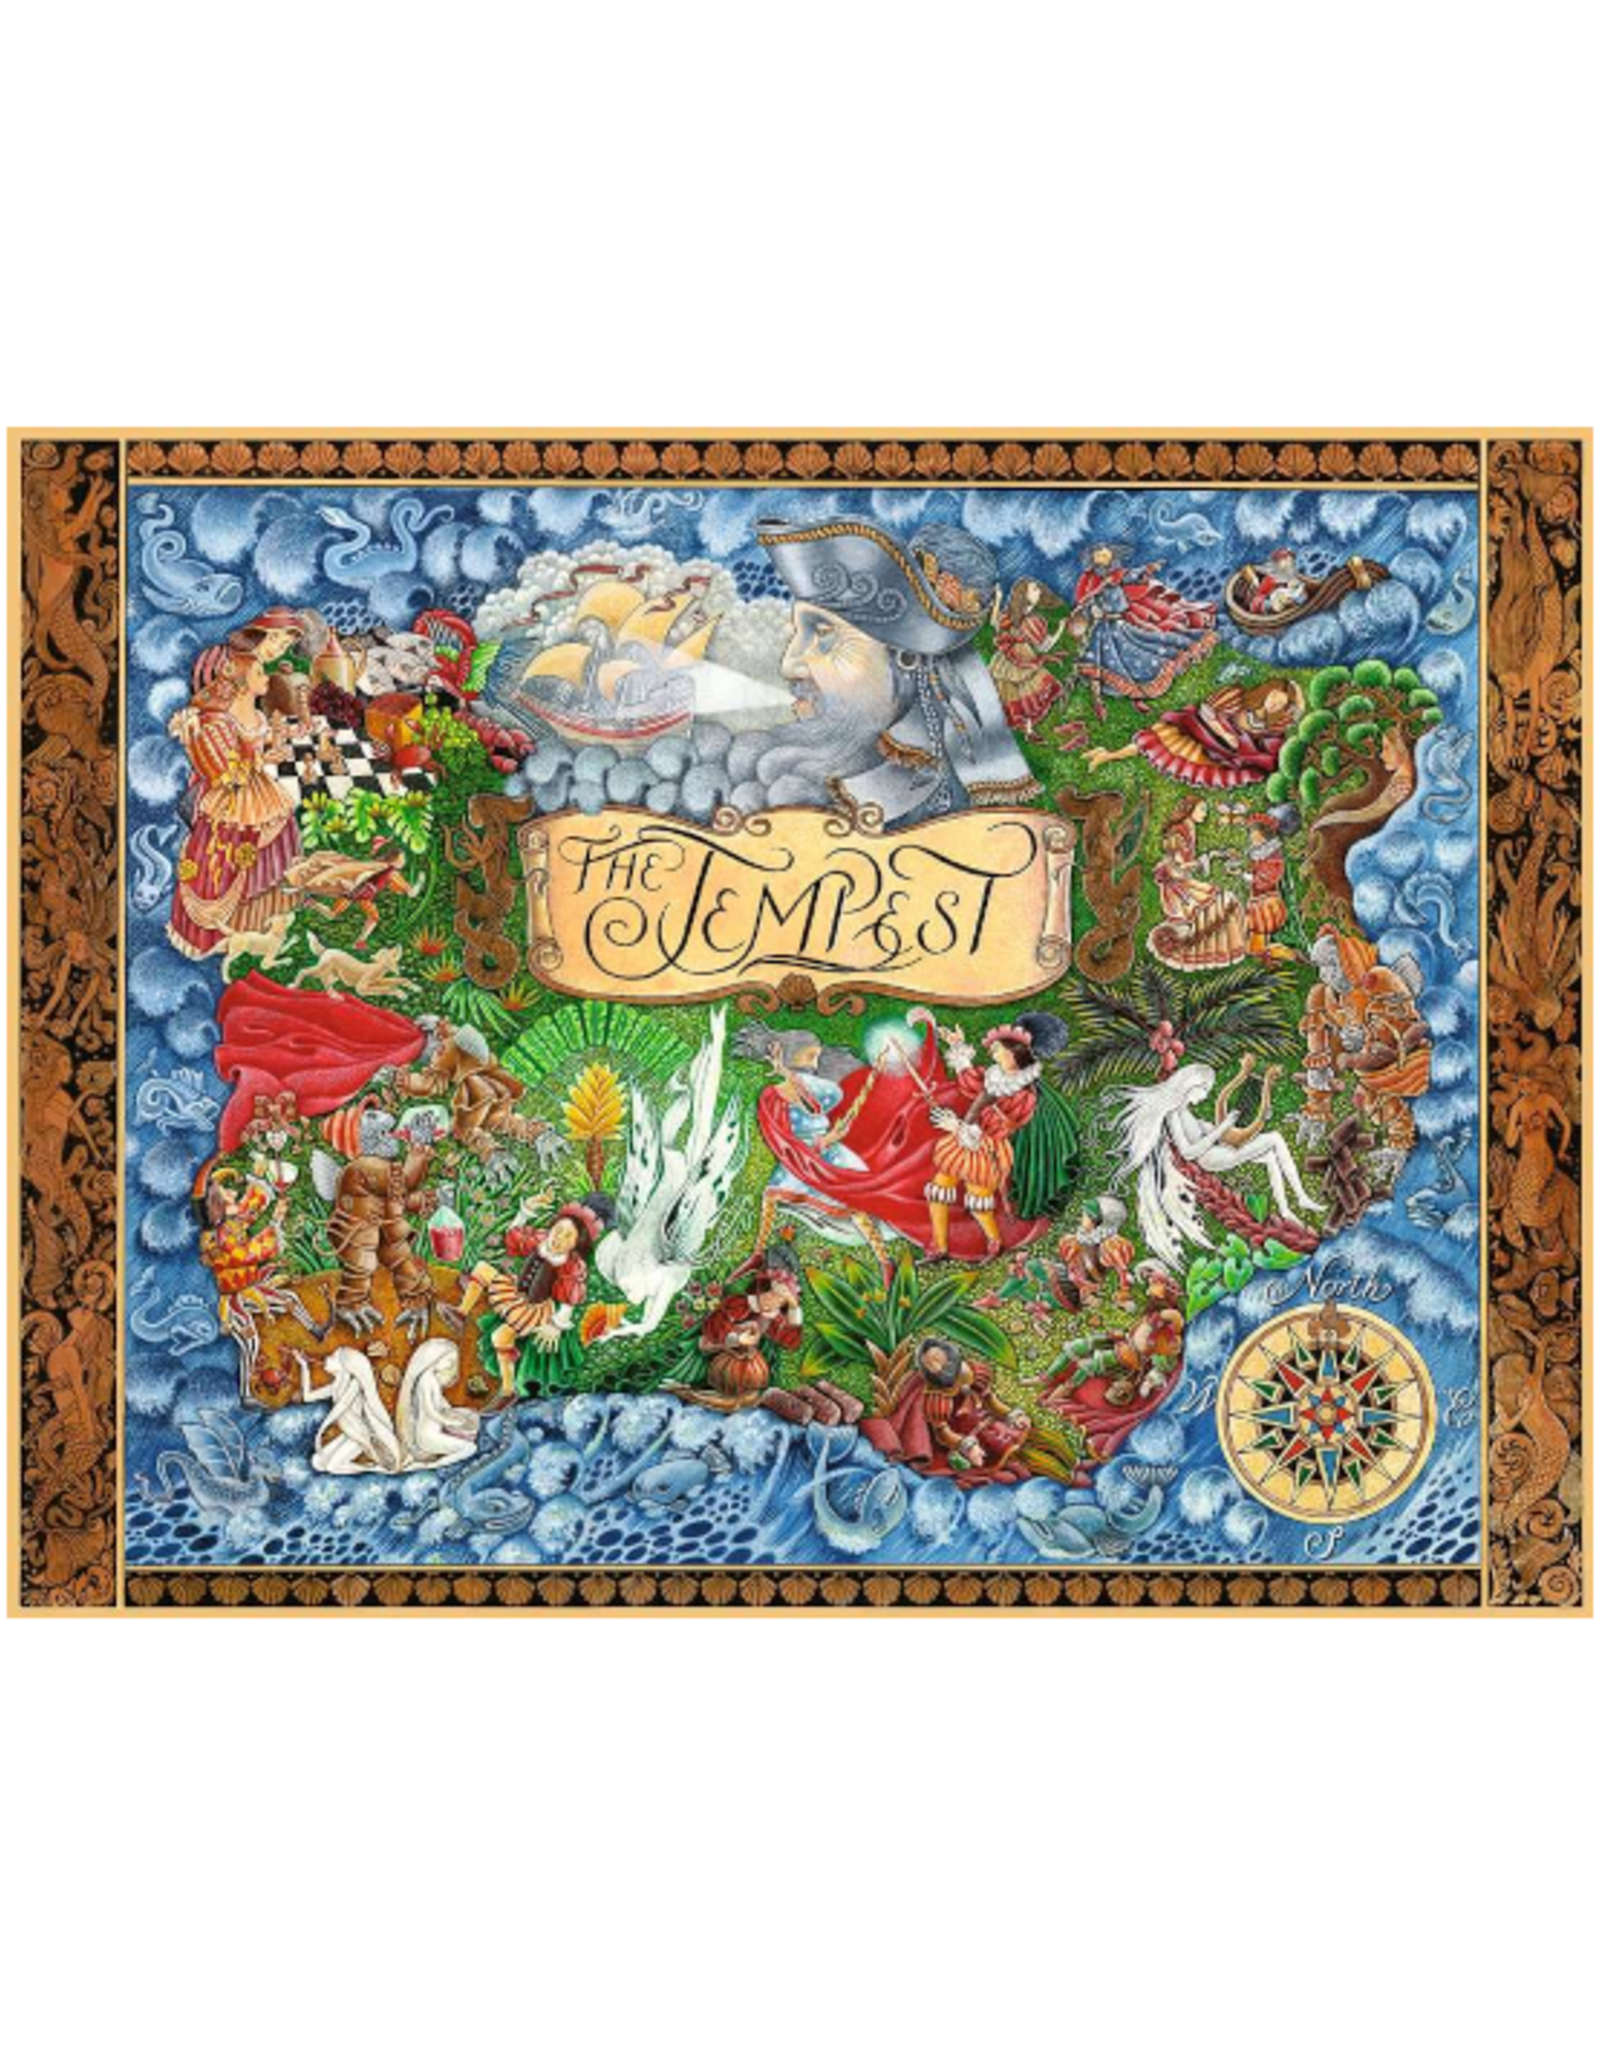 Stitch 3D jigsaw puzzle **Clearance**